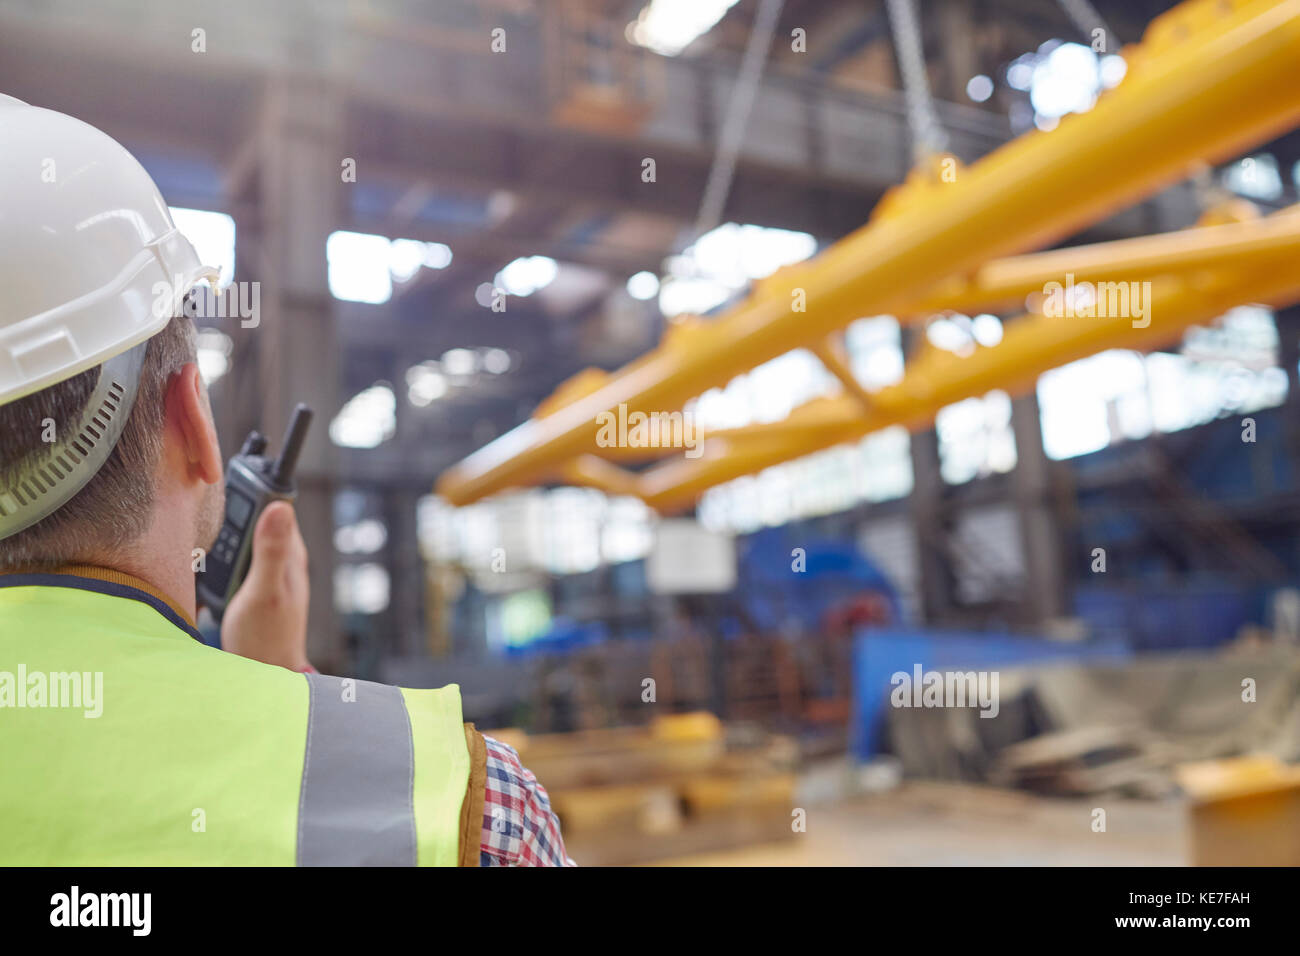 Male worker using walkie-talkie to guide hydraulic crane lowering equipment in factory Stock Photo